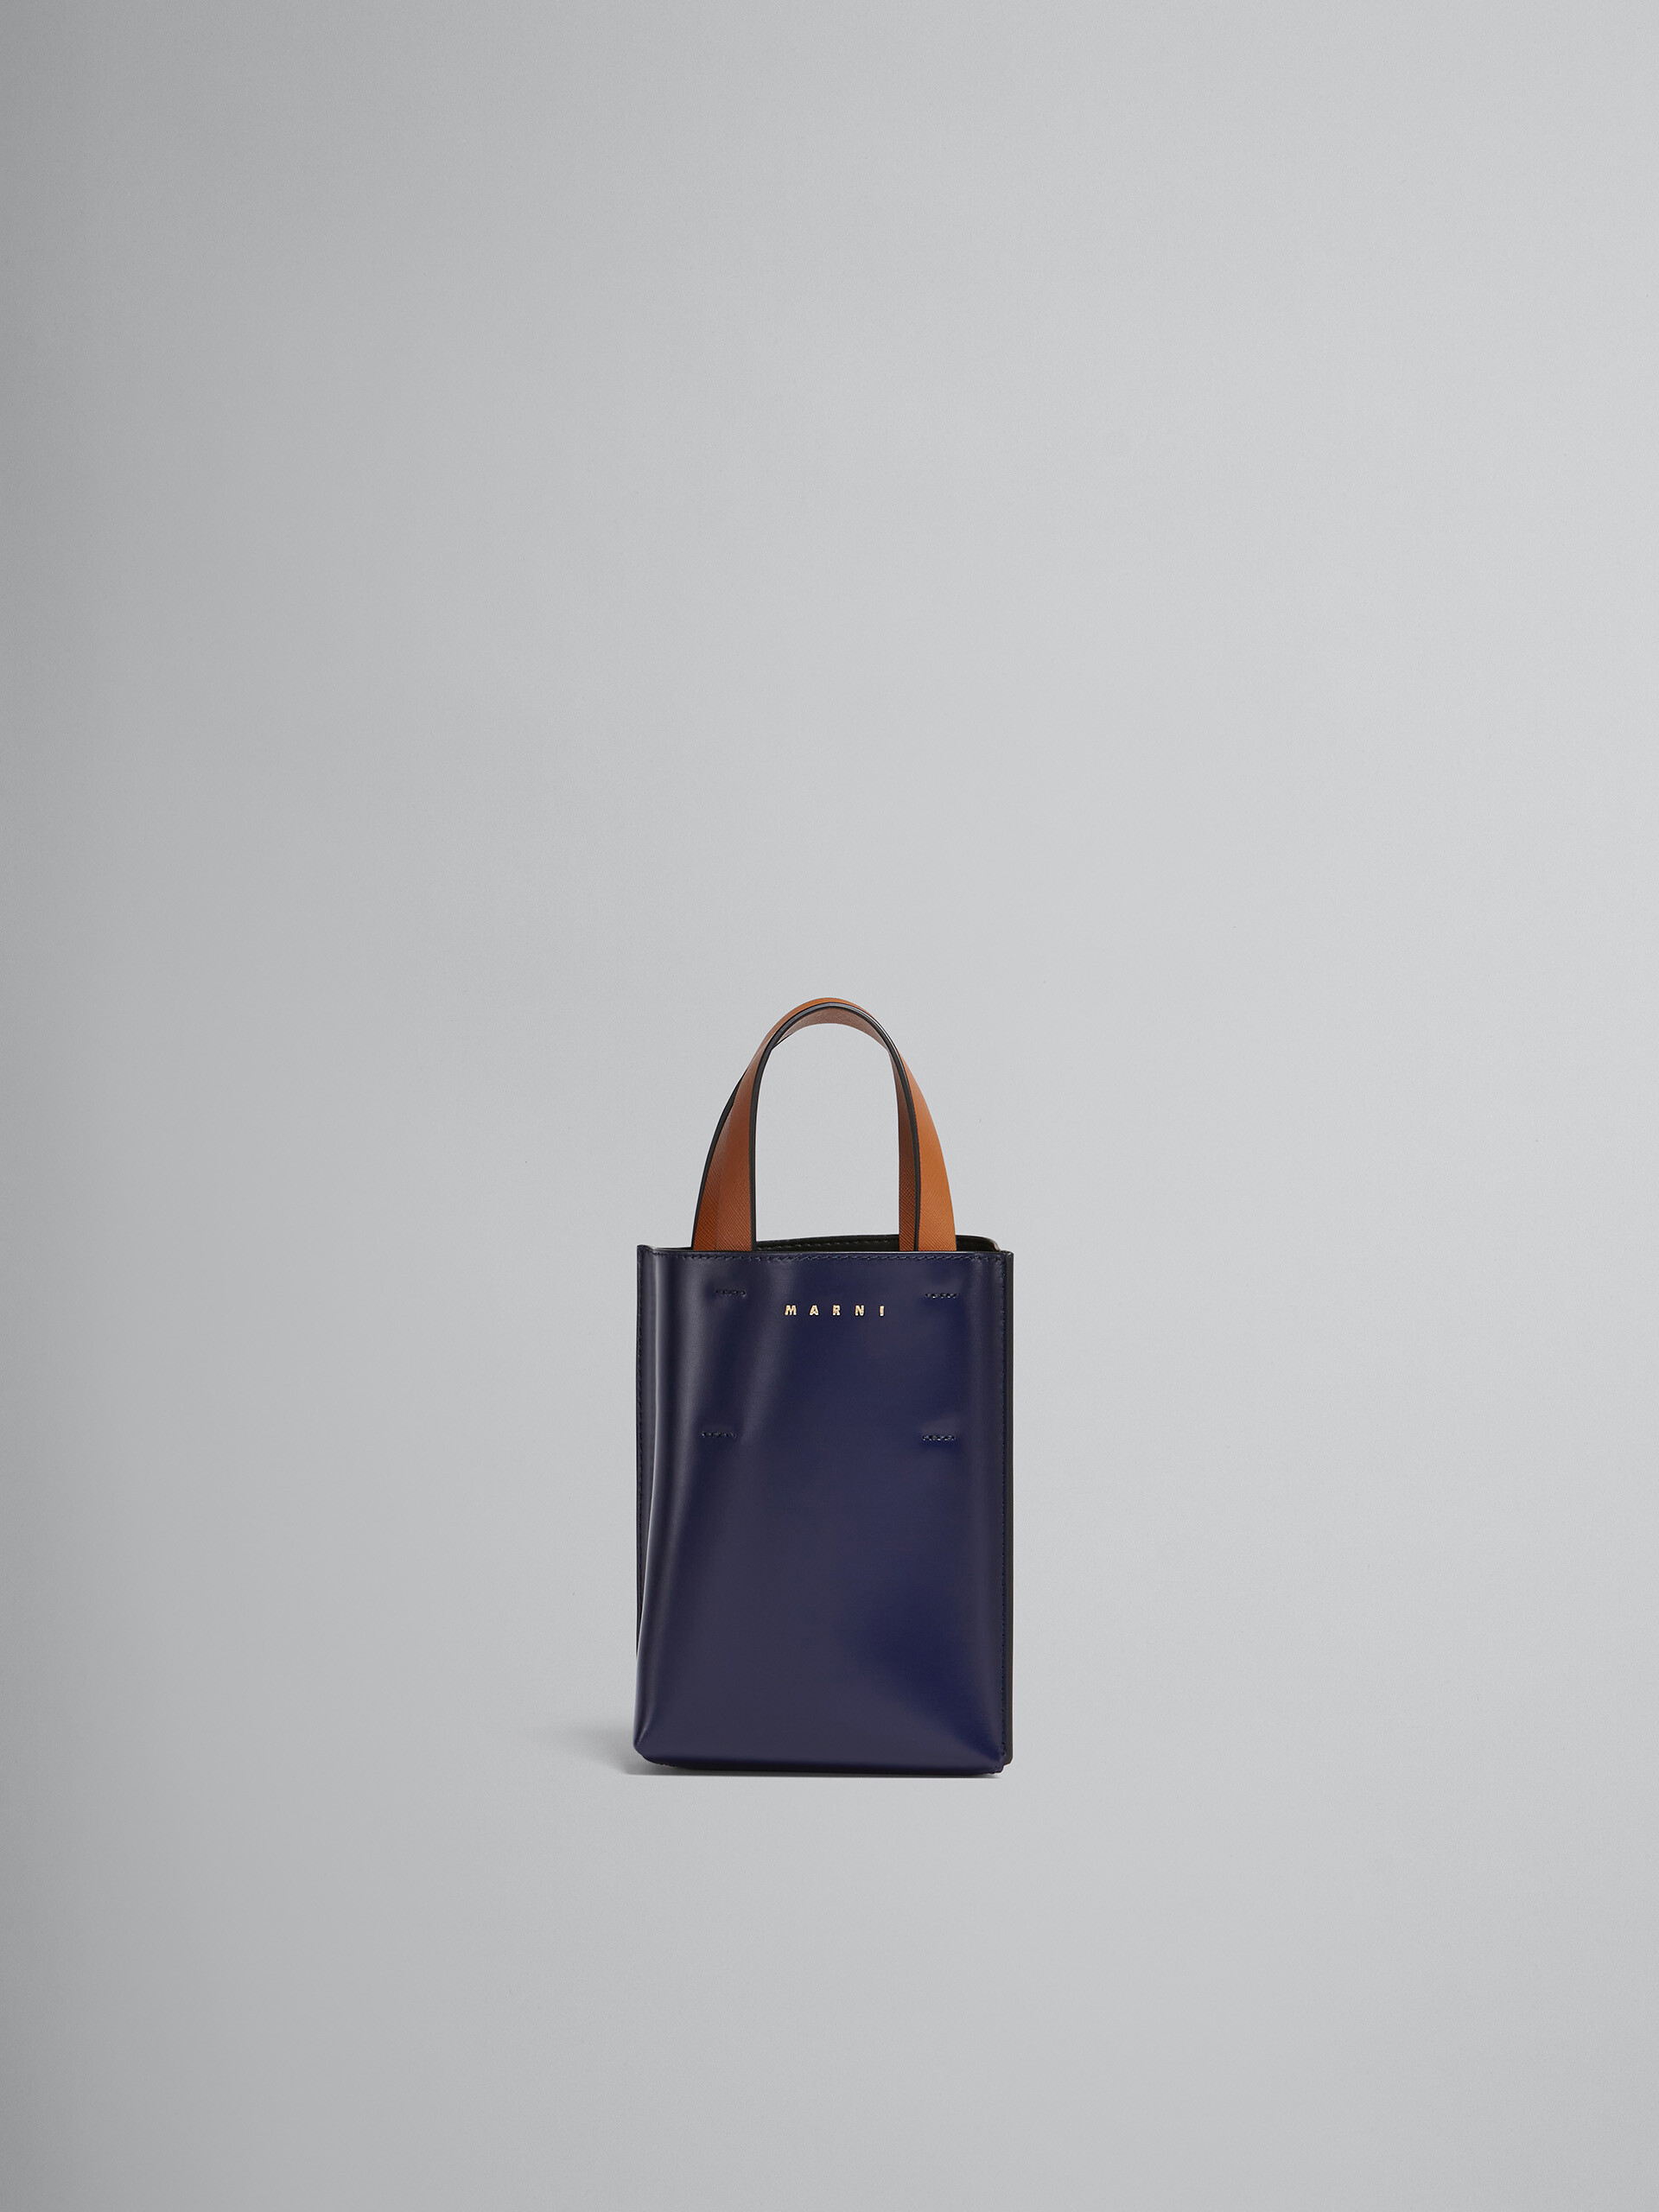 MUSEO nano bag in blue and white leather - Shopping Bags - Image 1